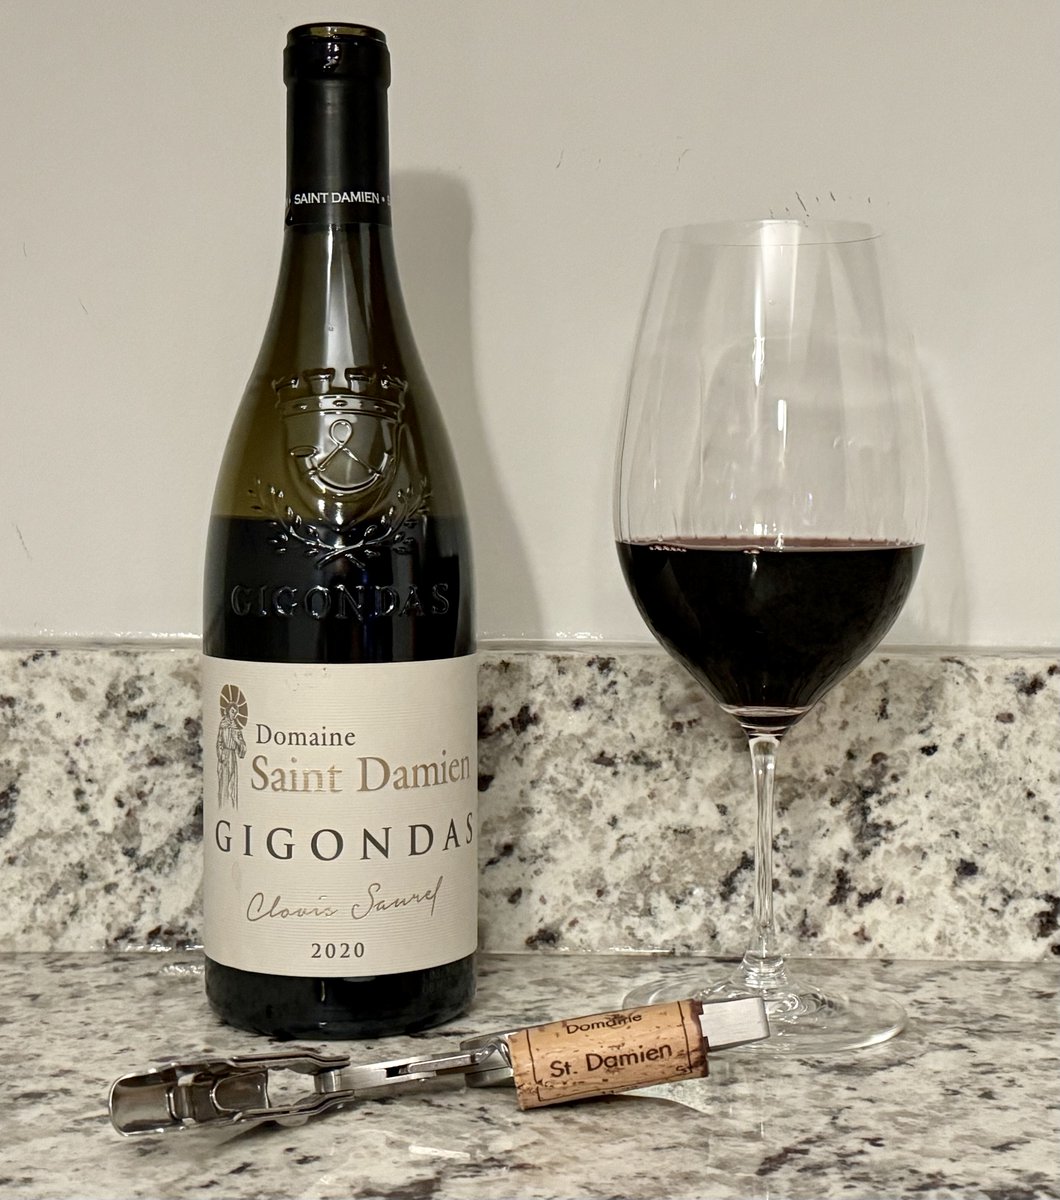 Wasn't really gonna drink... Covid exposure at work. But, whatever, if I get it, I get it. This is wonderful. Happy Friday! 🍷🇫🇷🍇#wine #gigondas #grenache